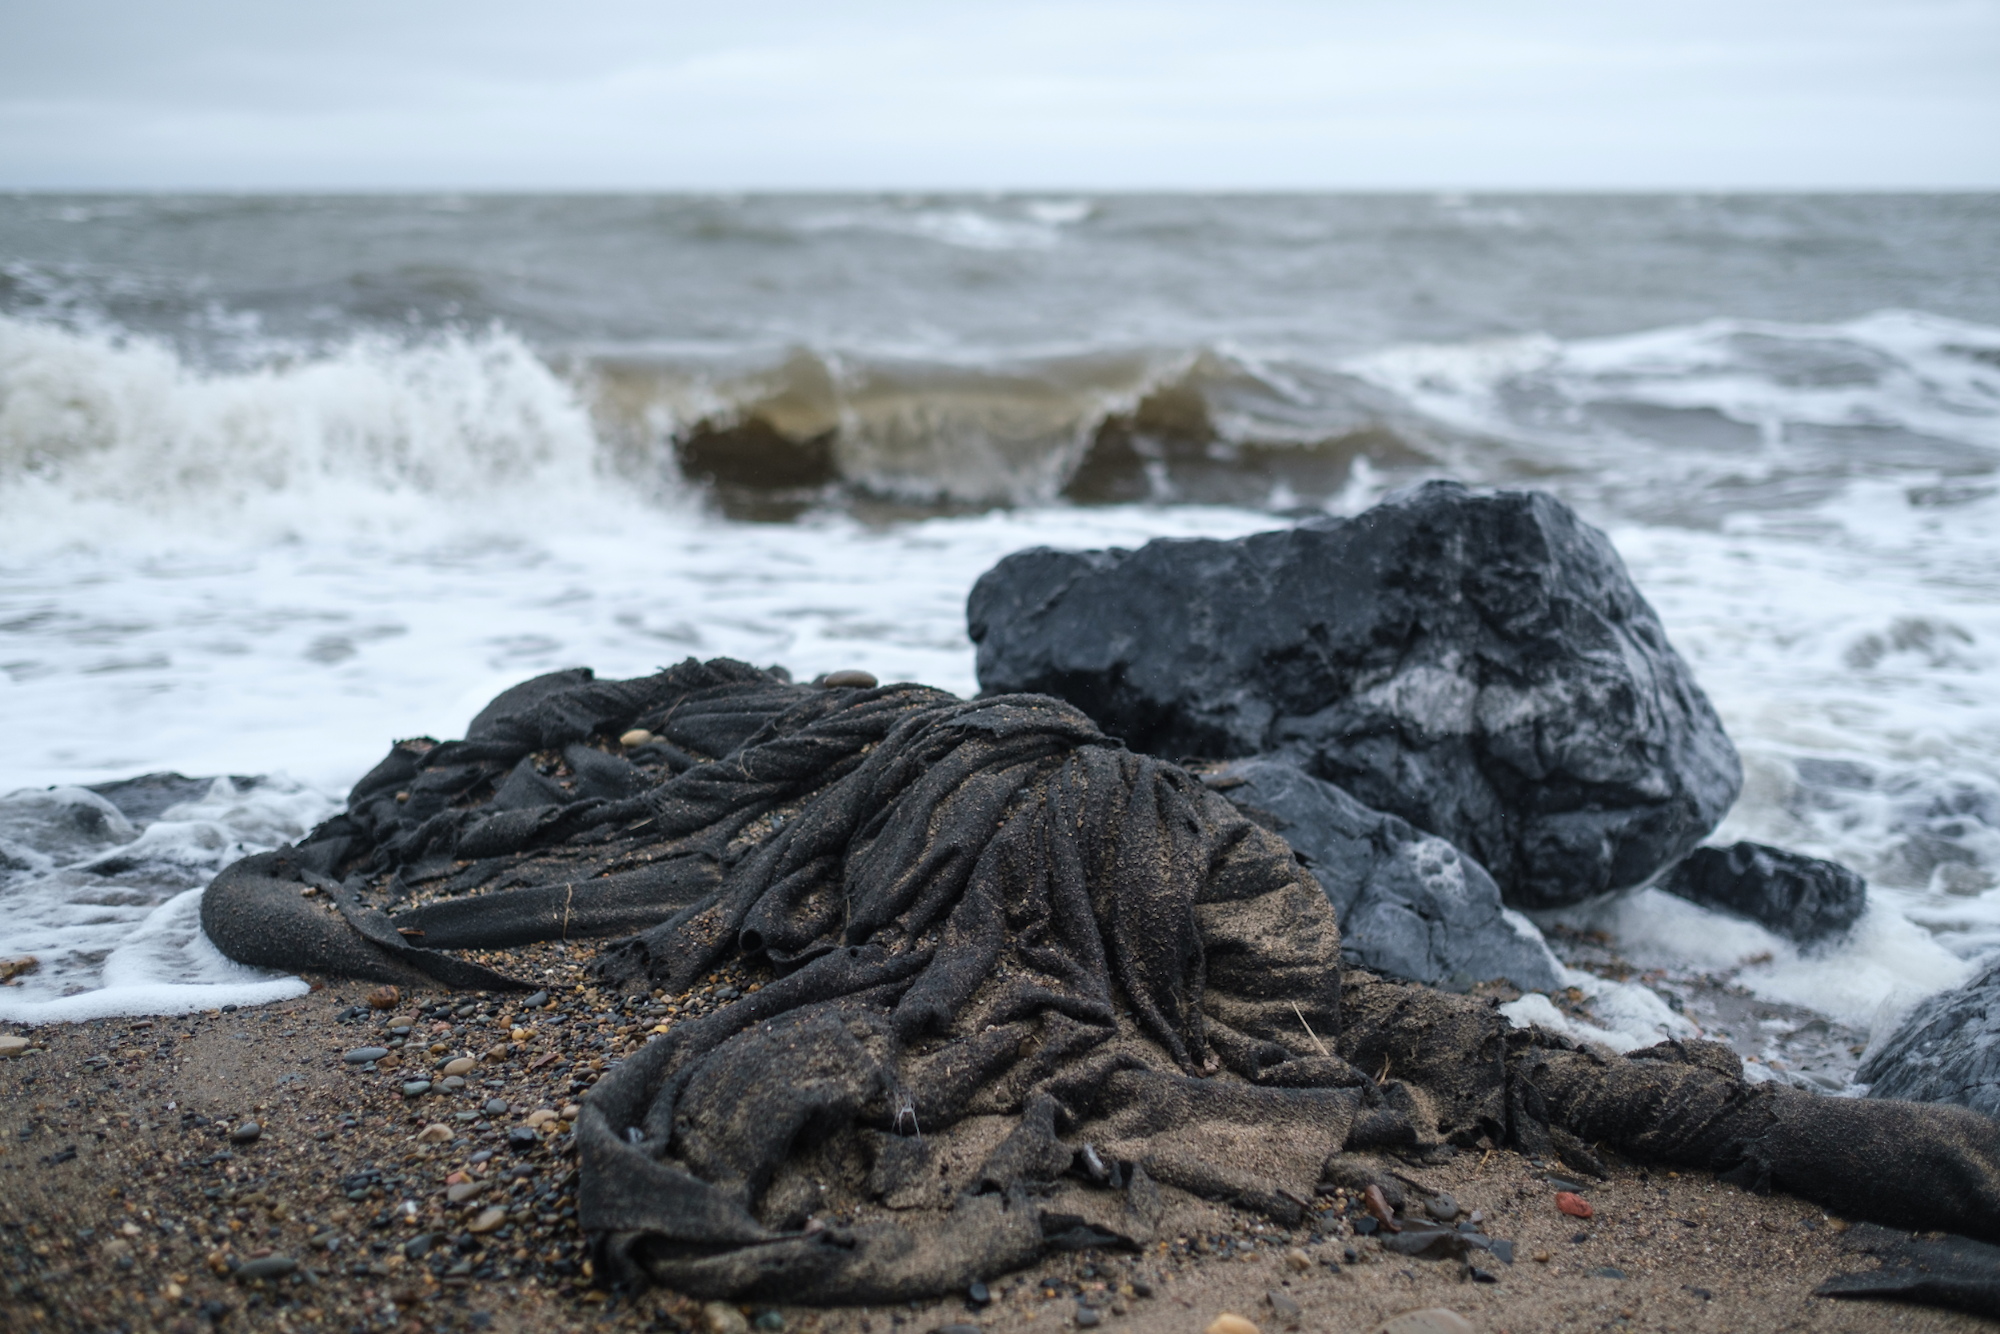 Geotextile meant to reinforce Tuktoyaktuk Beach, tattered by the waves.